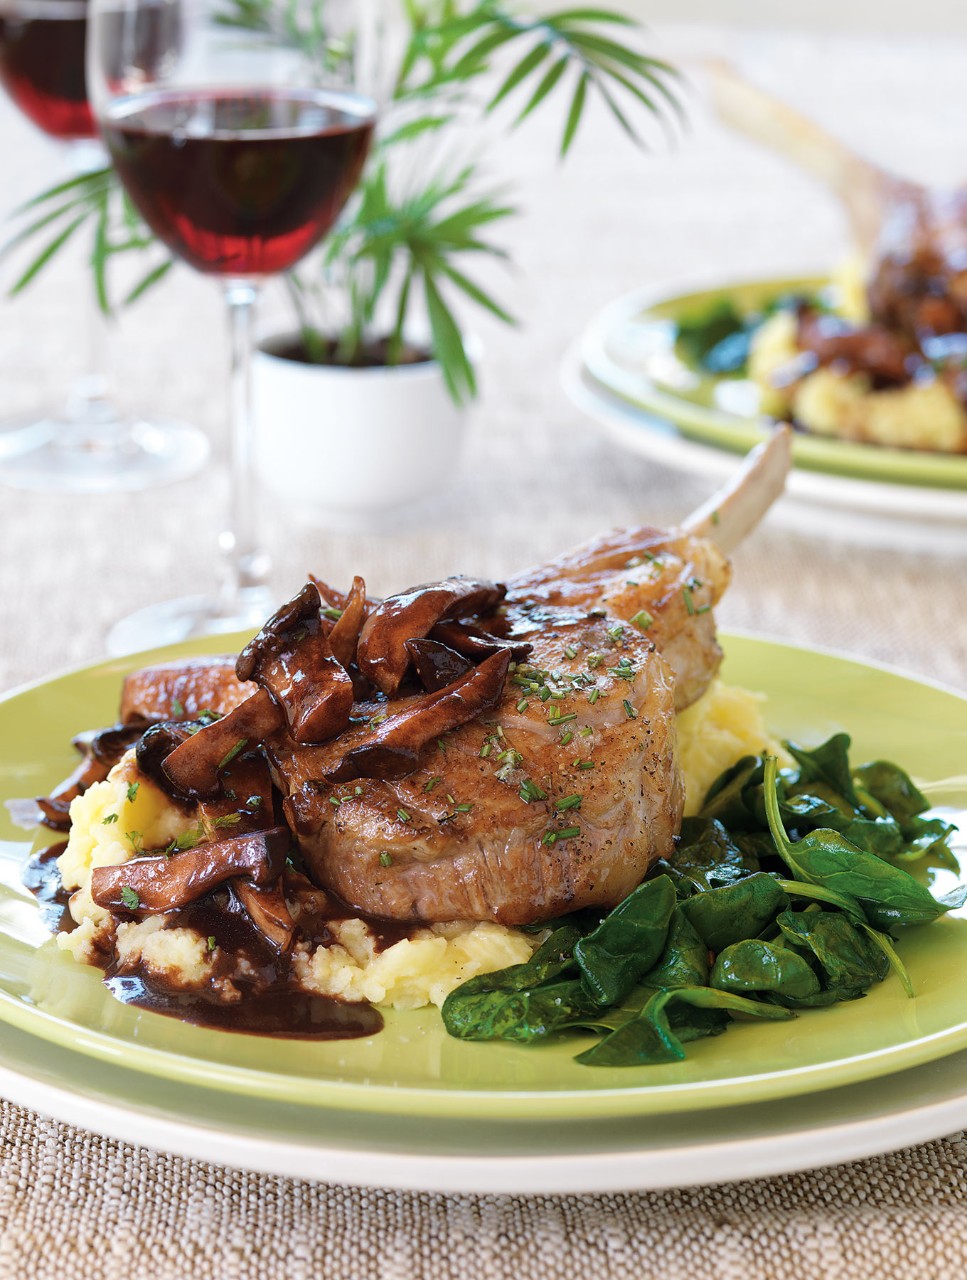 Roasted Veal Chops with King Mushroom Sauce